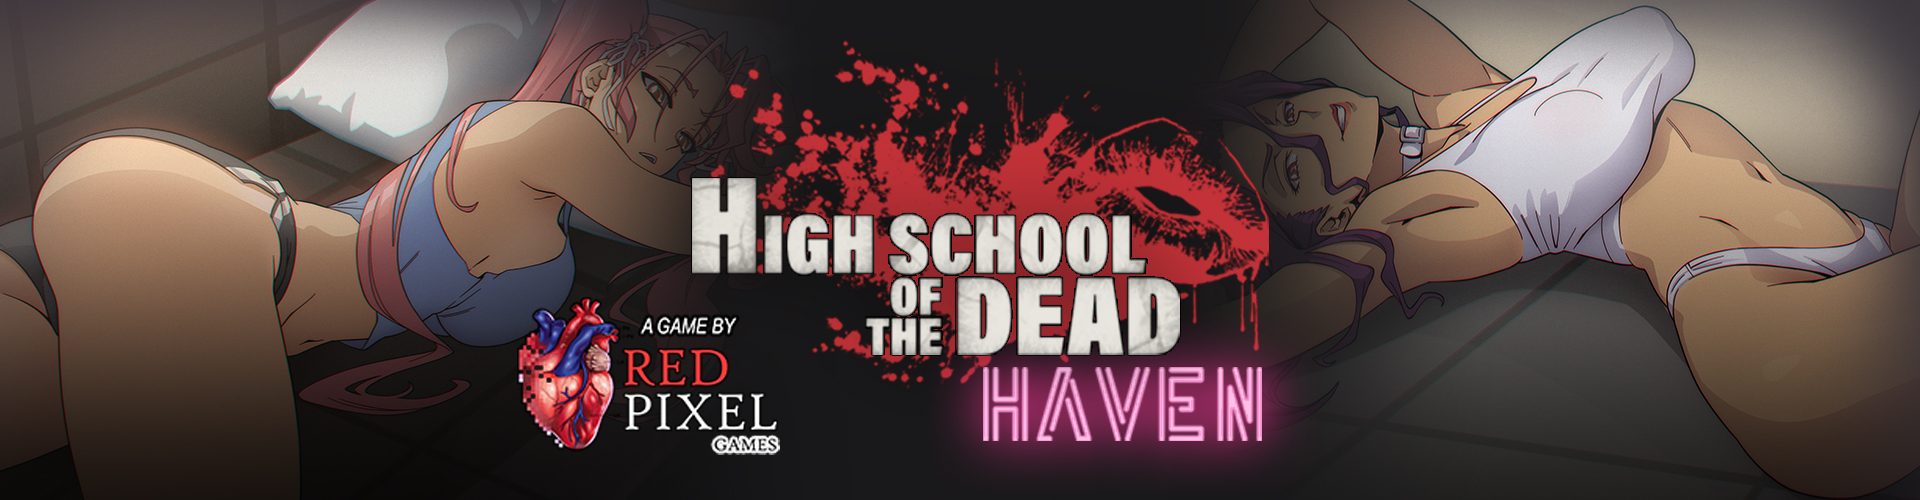 Highschool of the Dead: Haven poster